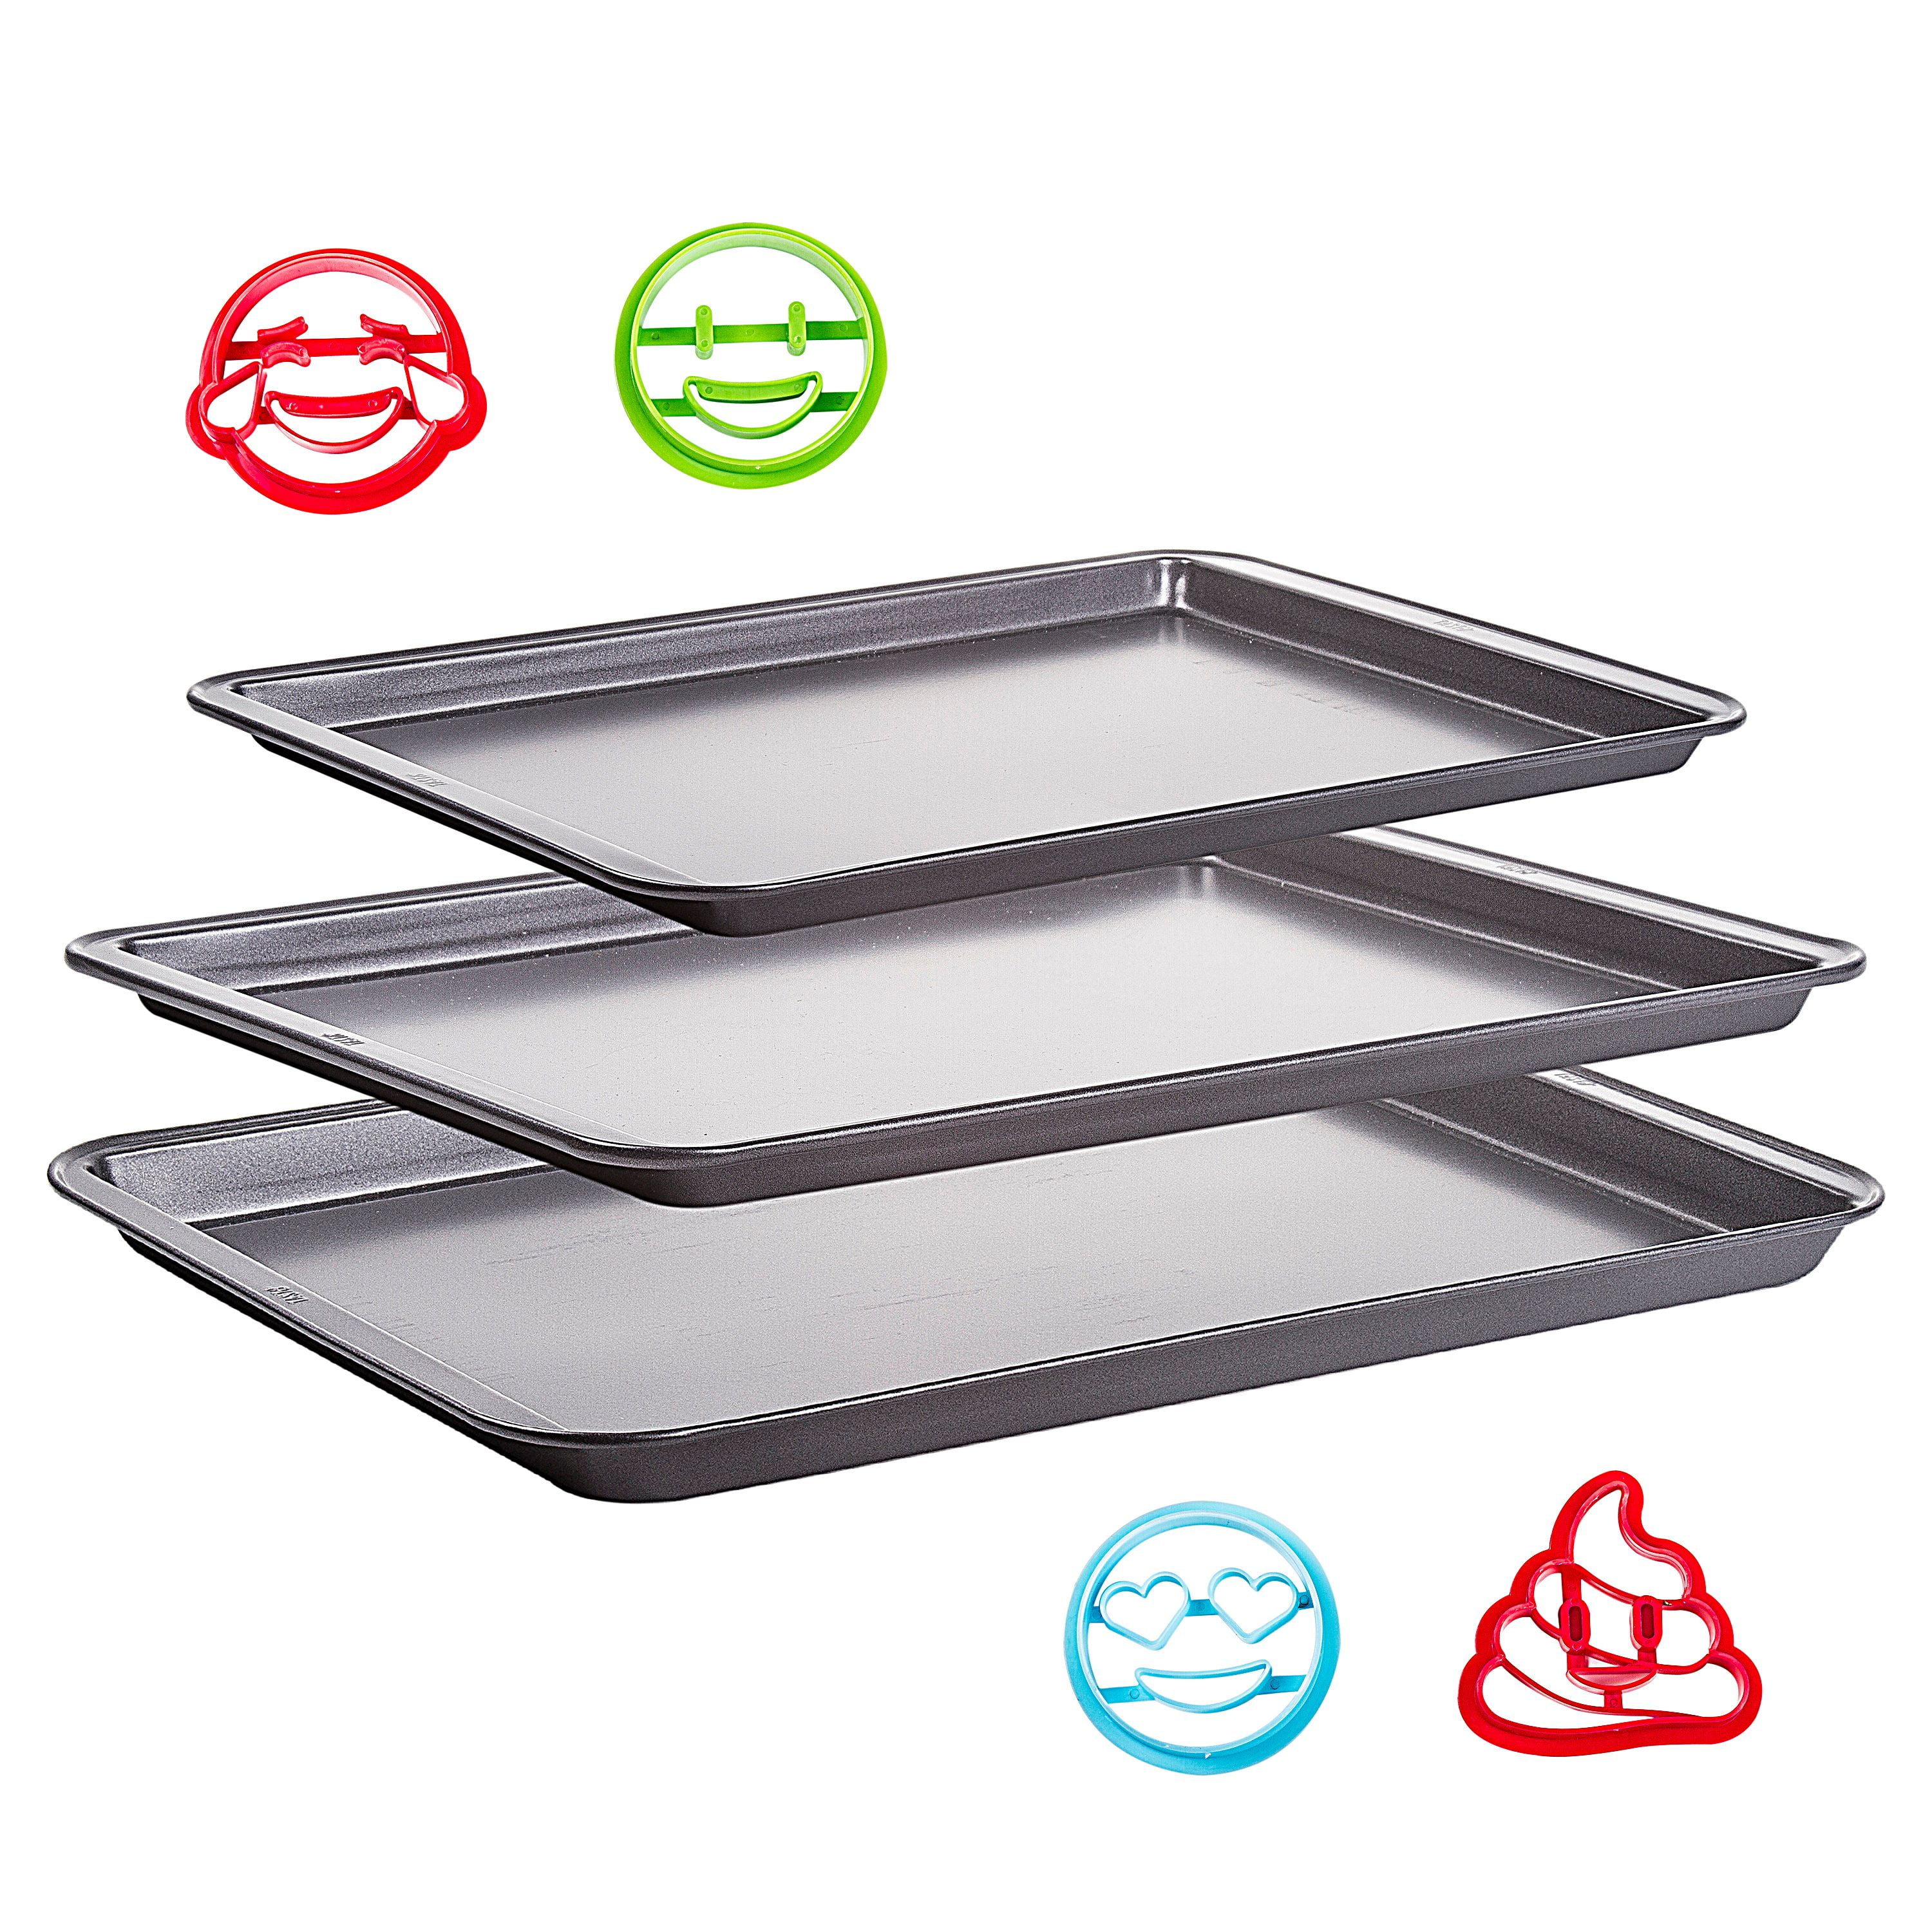 Tasty Carbon Steel Non-Stick 3 Piece Baking Sheet Set with Cookie Cutters,  Multicolor